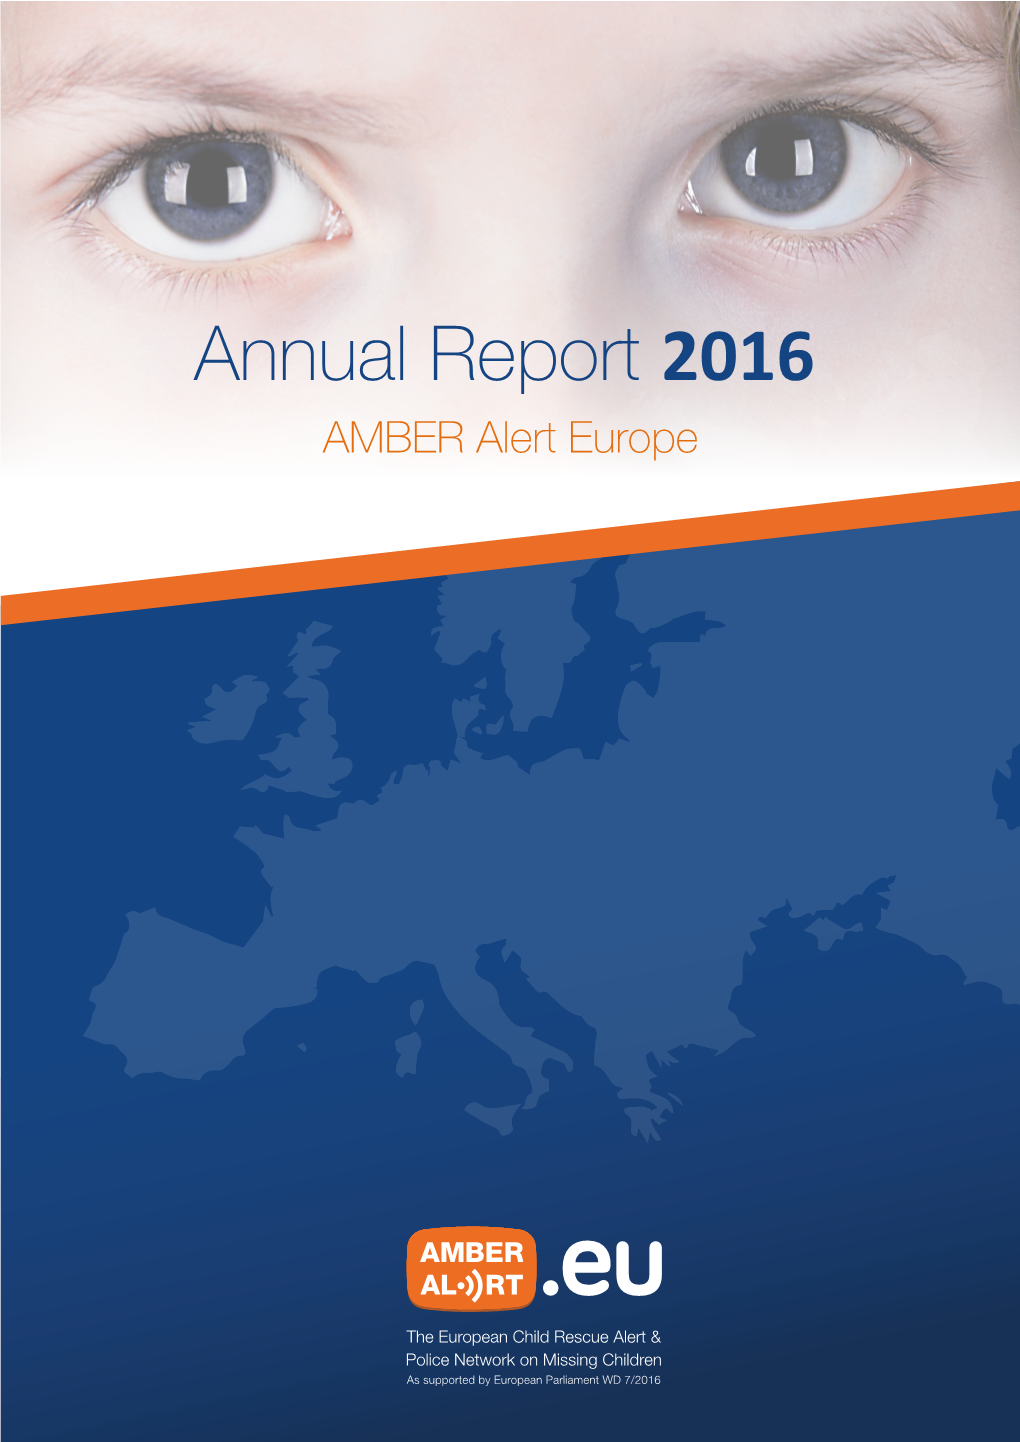 Annual and Financial Report 2016